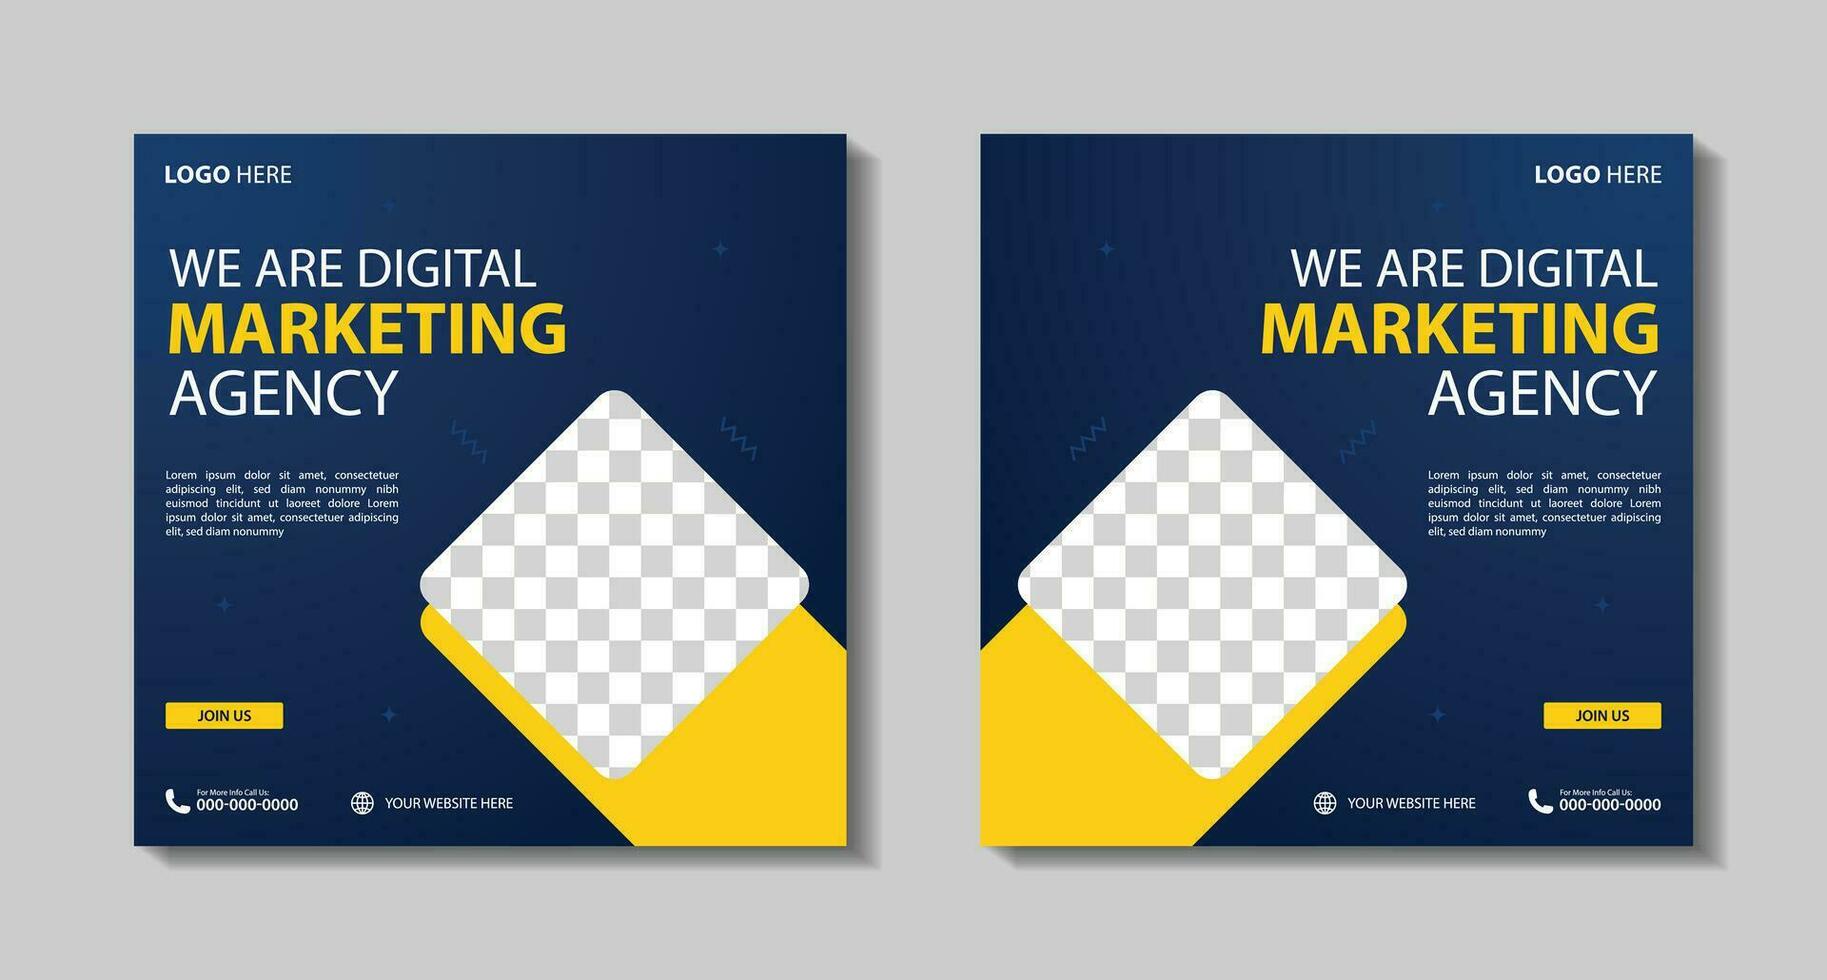 Marketing Agency Social Media Post, Digital Marketing Web Banner, Corporate Square Flyer Template. Vector illustration with Space to add pictures minimal and modern design.